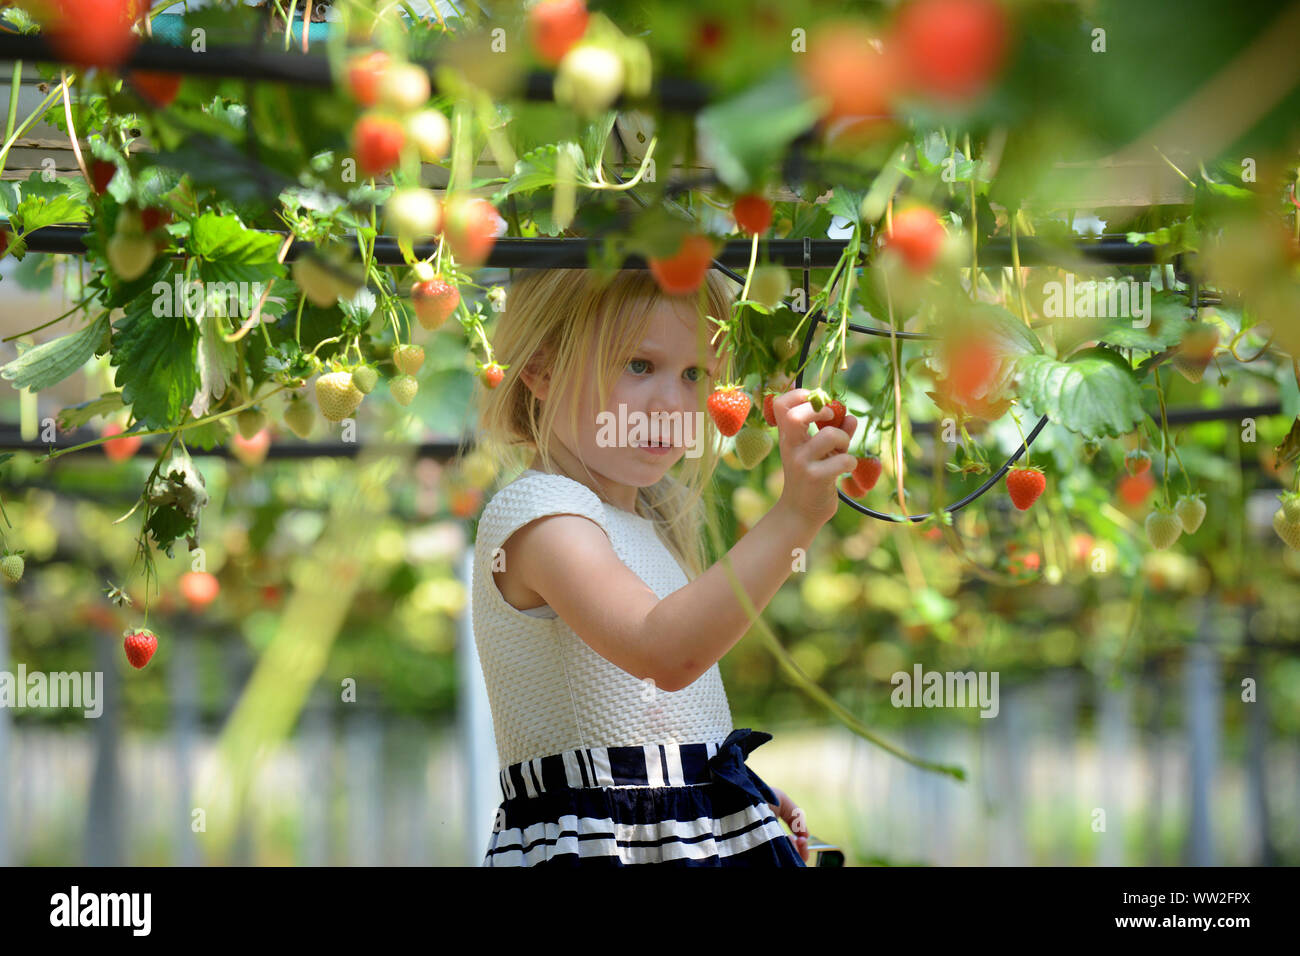 A young girl picks strawberries and other fruits during a visit to a fruit farm near Edinburgh, Scotland Stock Photo